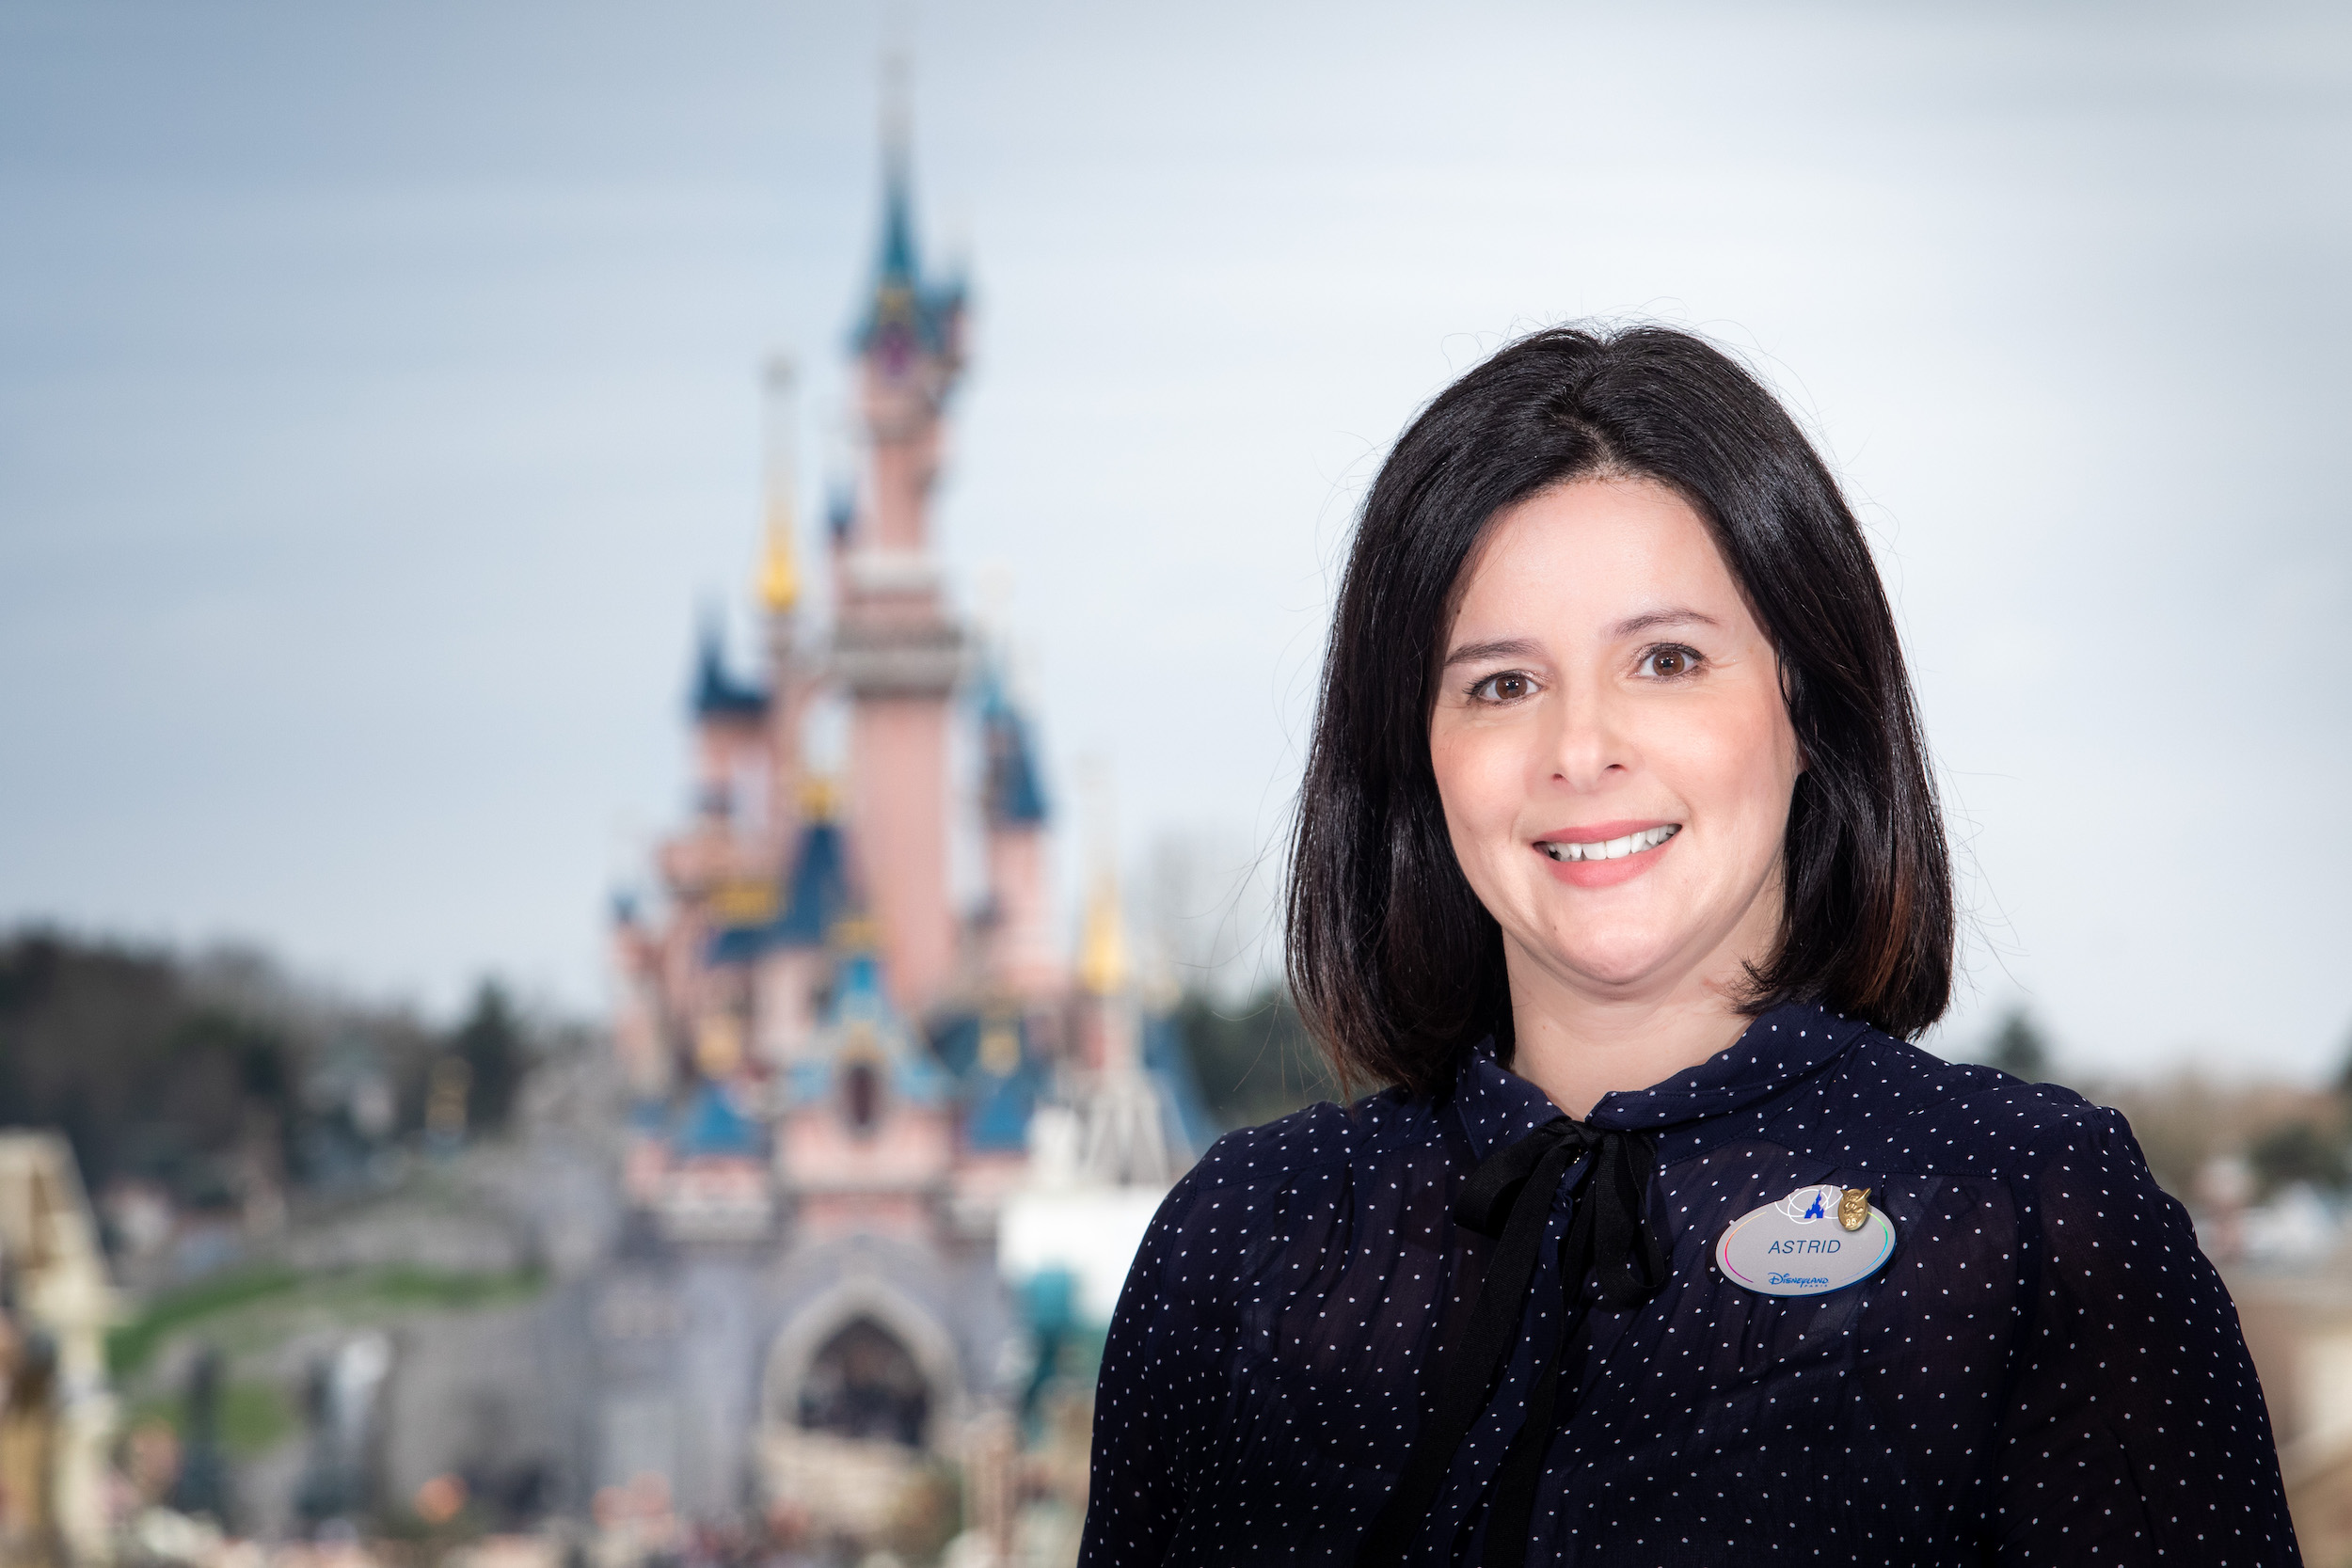 DISNEY STARS ON PARADE: Interview with the Show Producer, Astrid Gomez